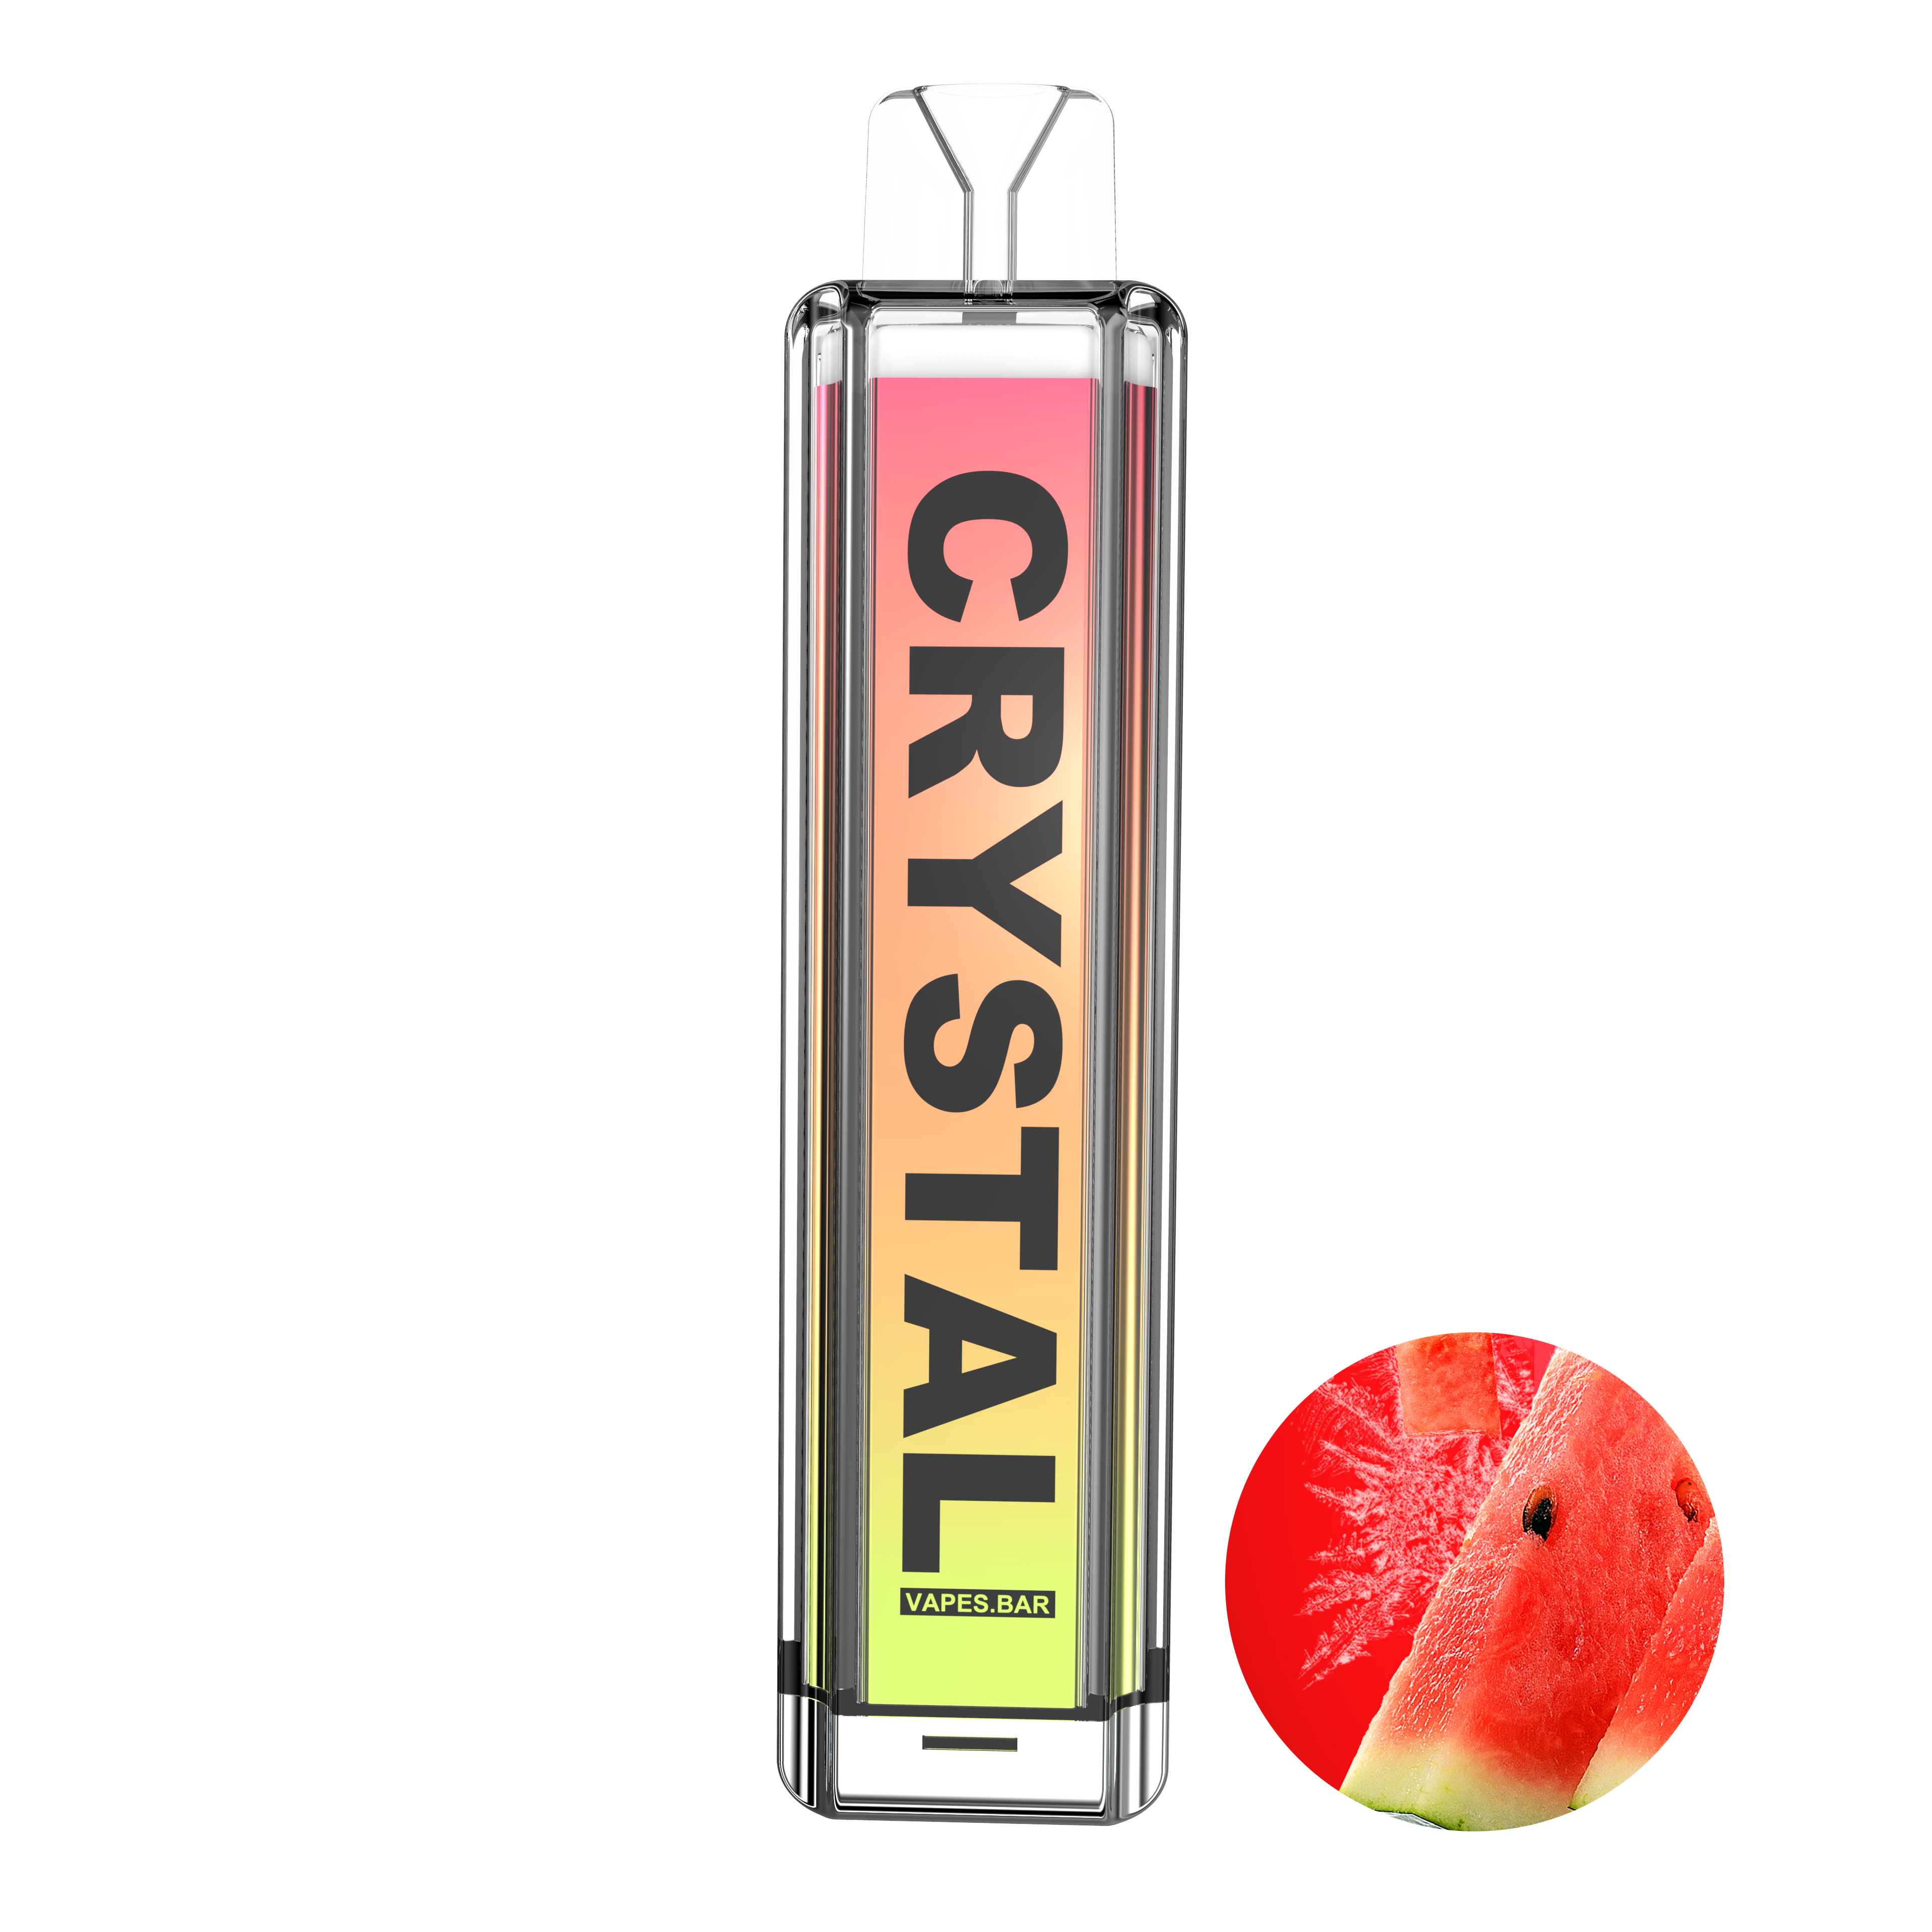 Watermelon Ice Crystal 5000 Puffs Disposable Vape Device -VAPES.BAR